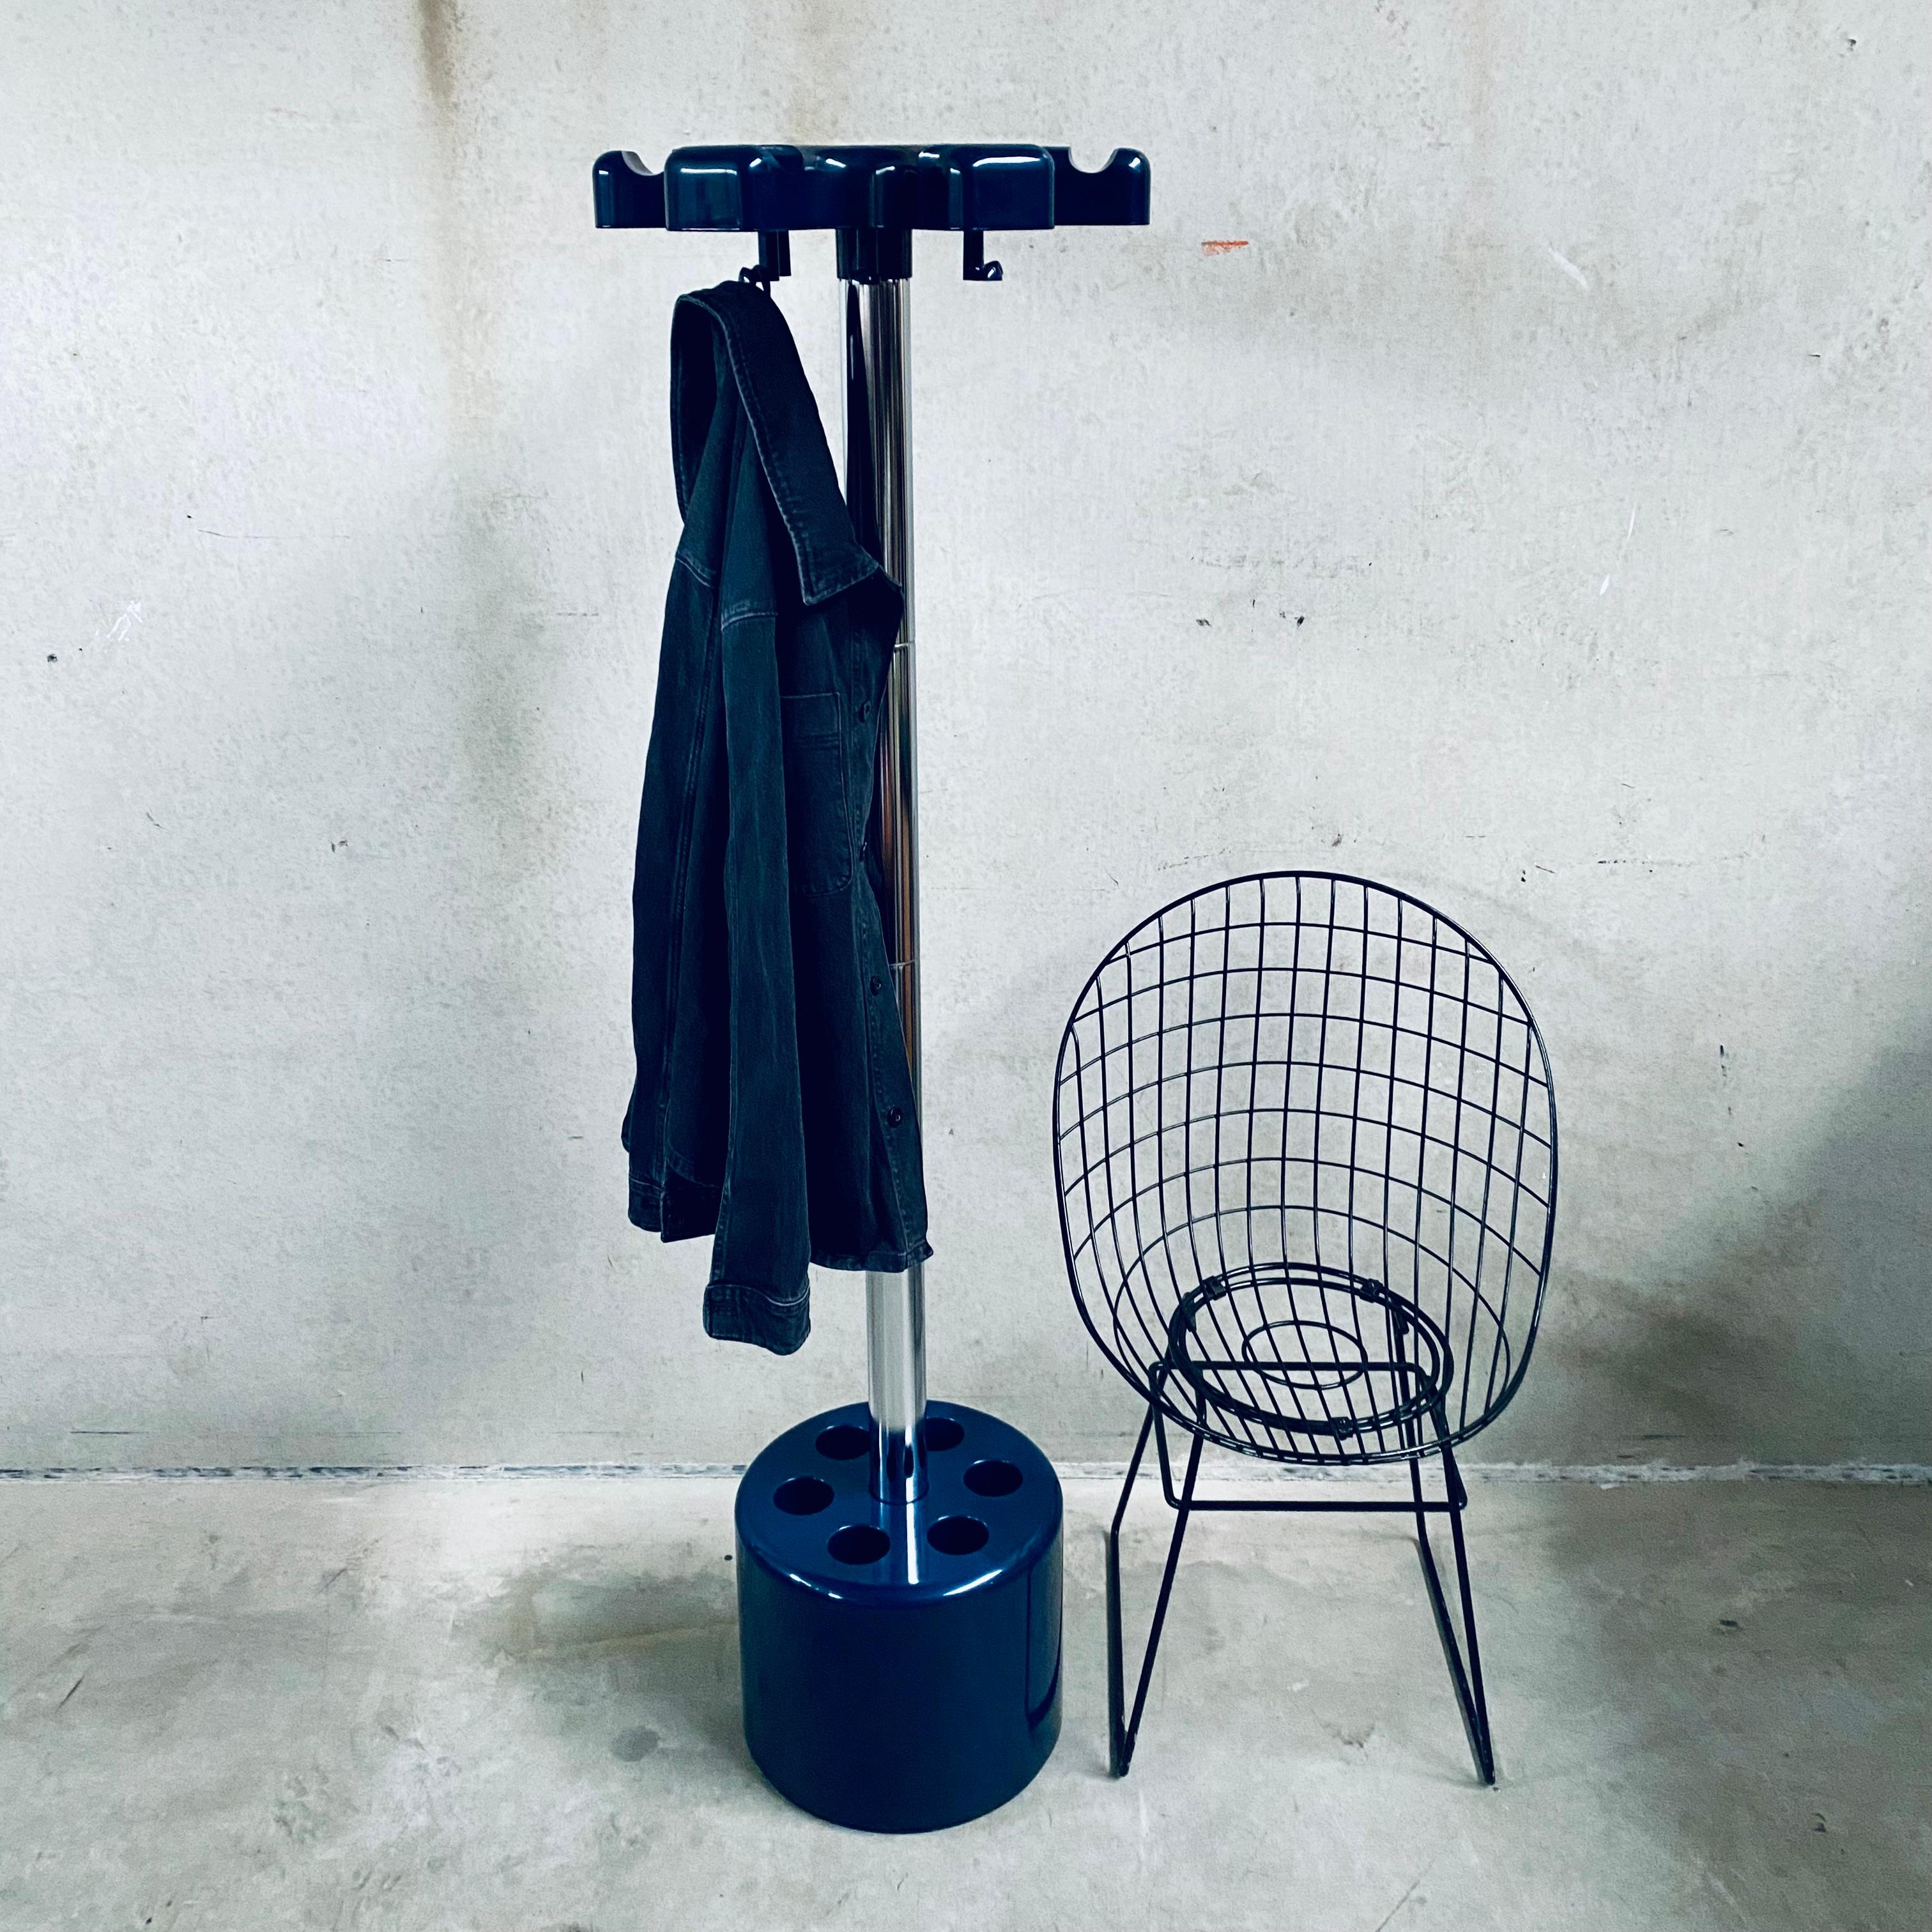 Introducing the epitome of timeless elegance and functionality - the Mid-Century Coat Rack and Umbrella Stand model VIP by Paolo Orlandini & Roberto Lucci for Velca, Italy 1970. Crafted with meticulous attention to detail, this Italian design